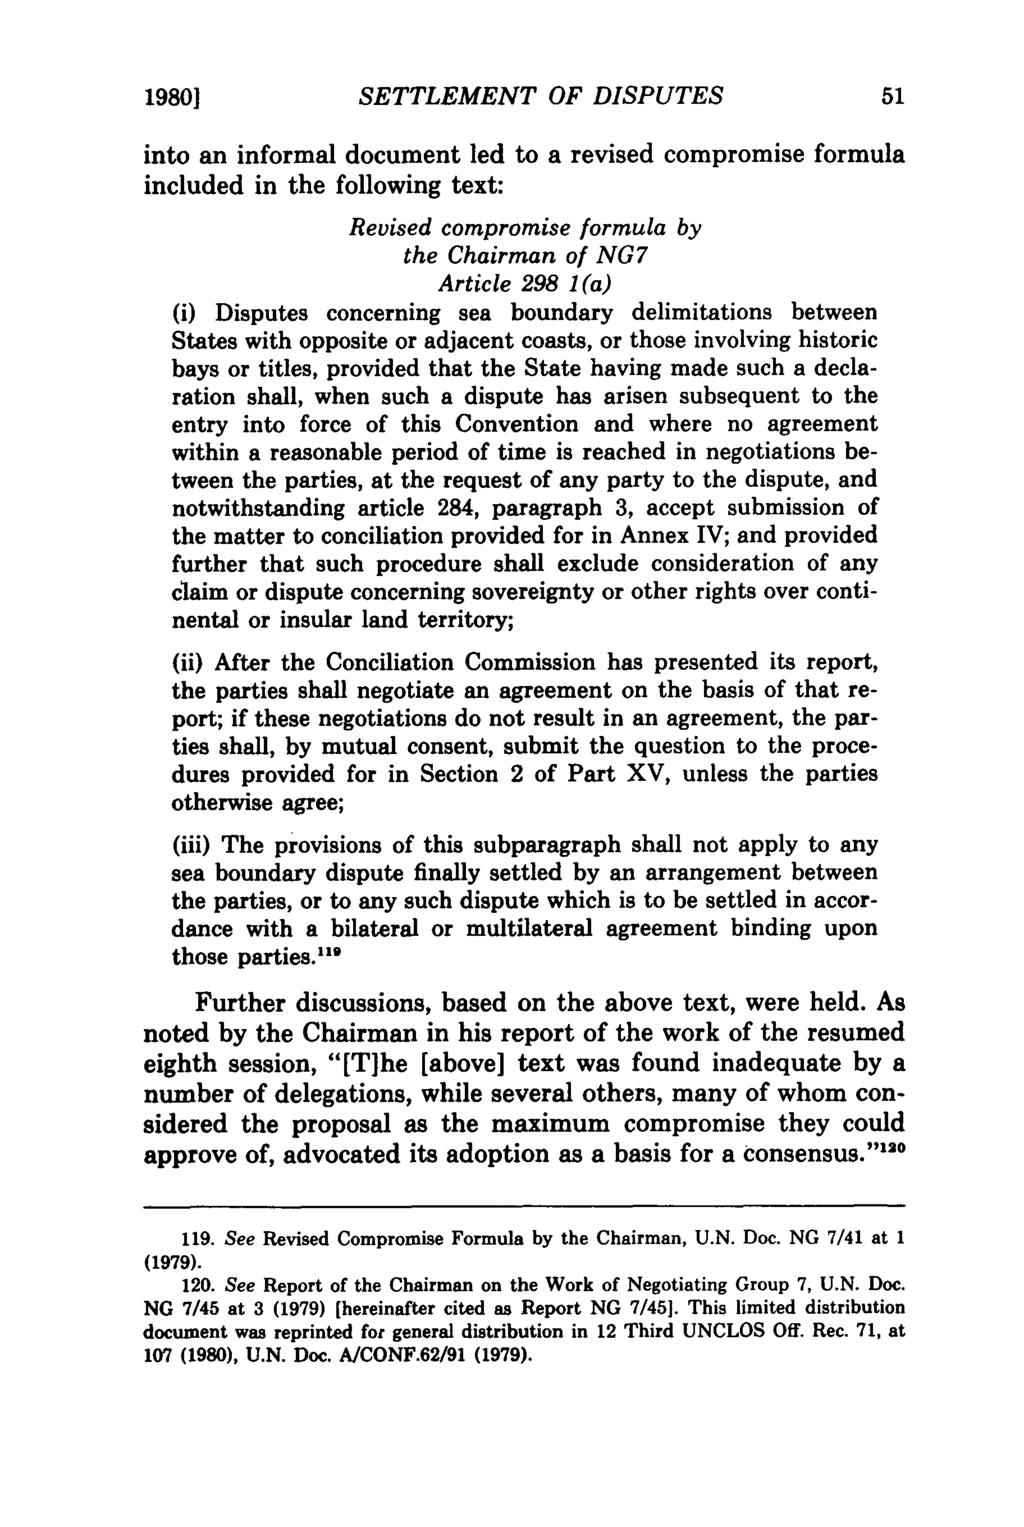 19801 SETTLEMENT OF DISPUTES into an informal document led to a revised compromise formula included in the following text: Revised compromise formula by the Chairman of NG7 Article 298 1(a) (i)